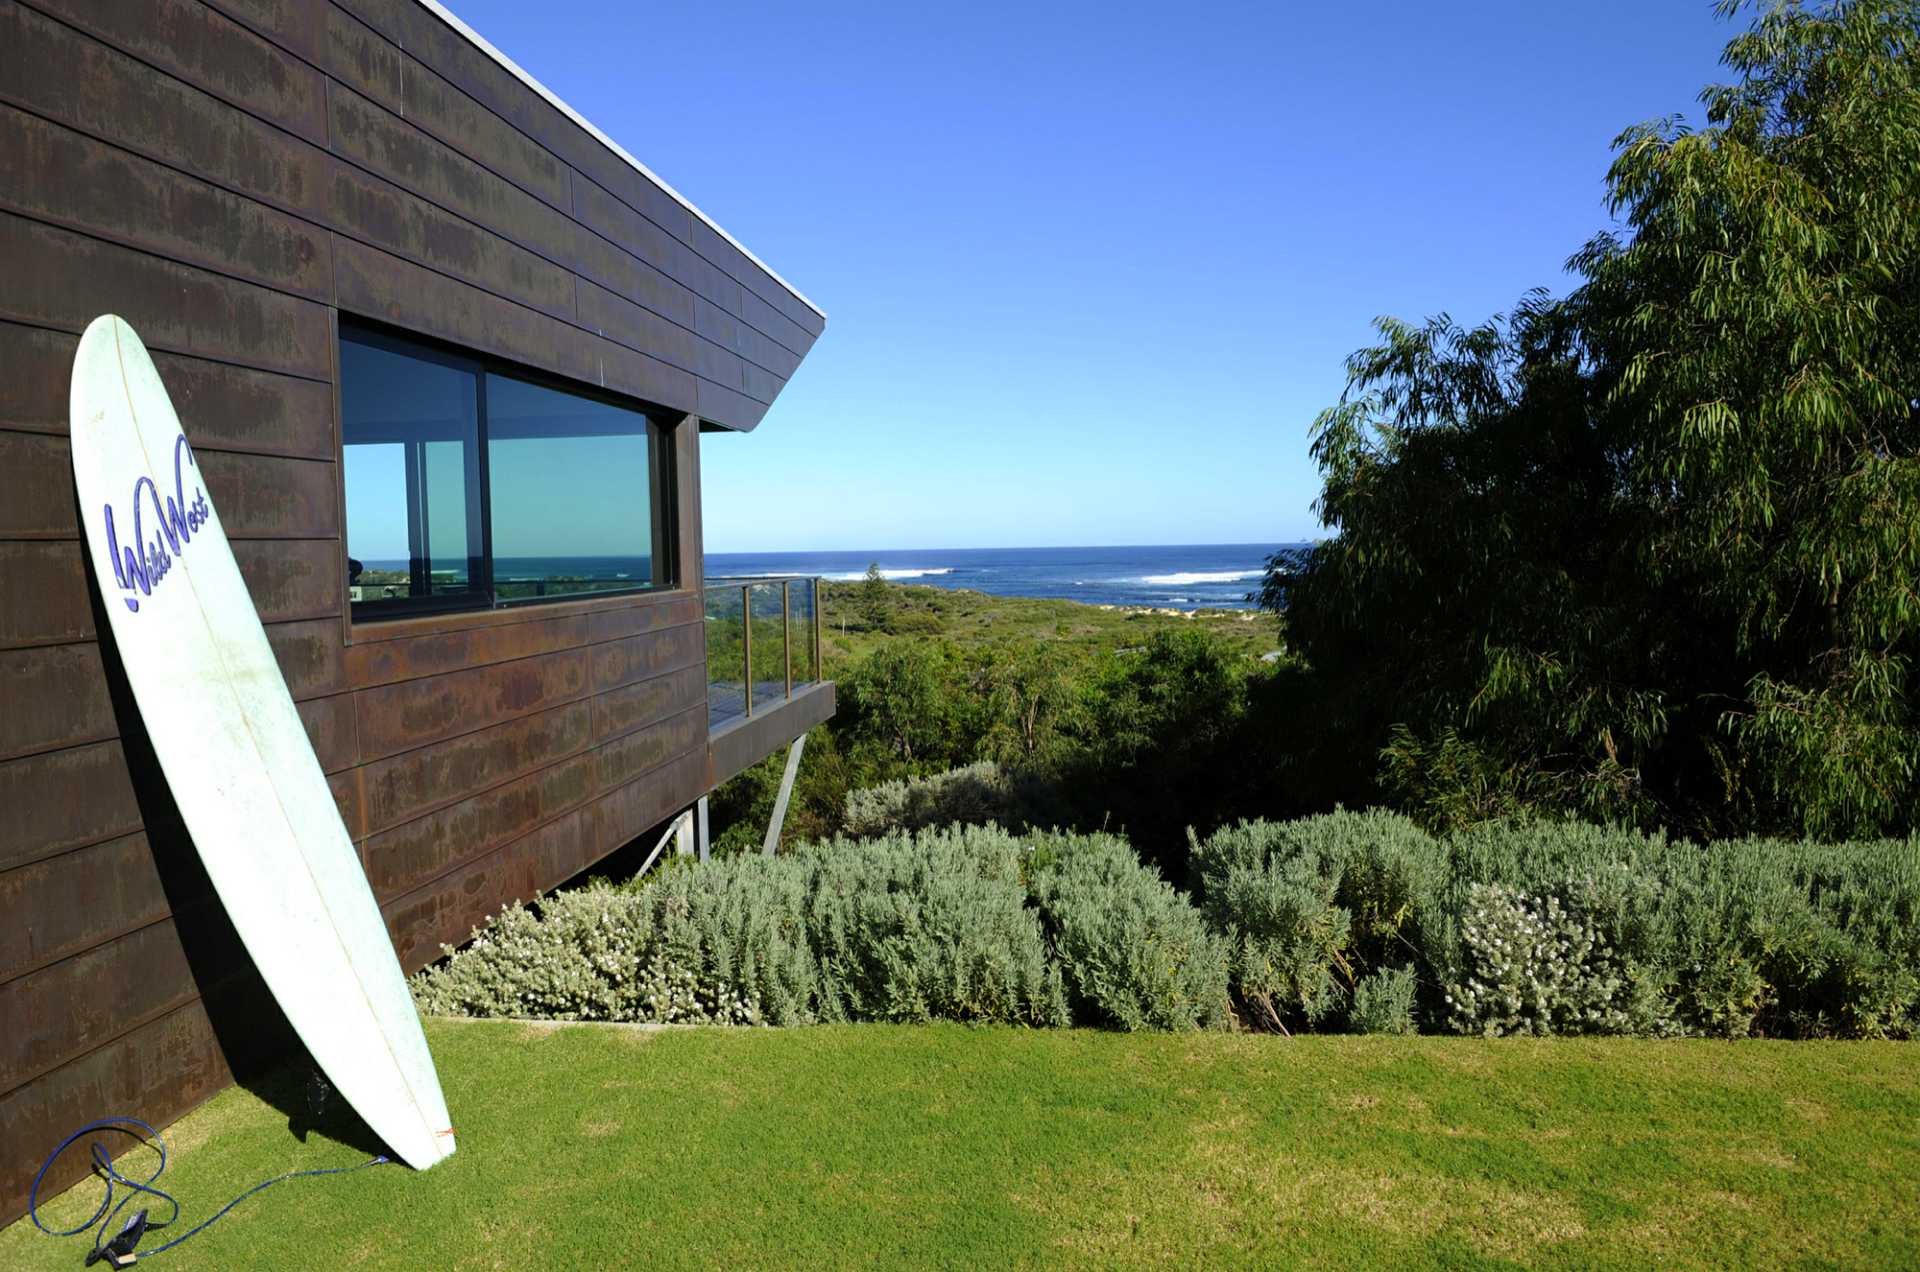 Surfboard leaning up against outside wall of beach house with views of the bombie surf break.